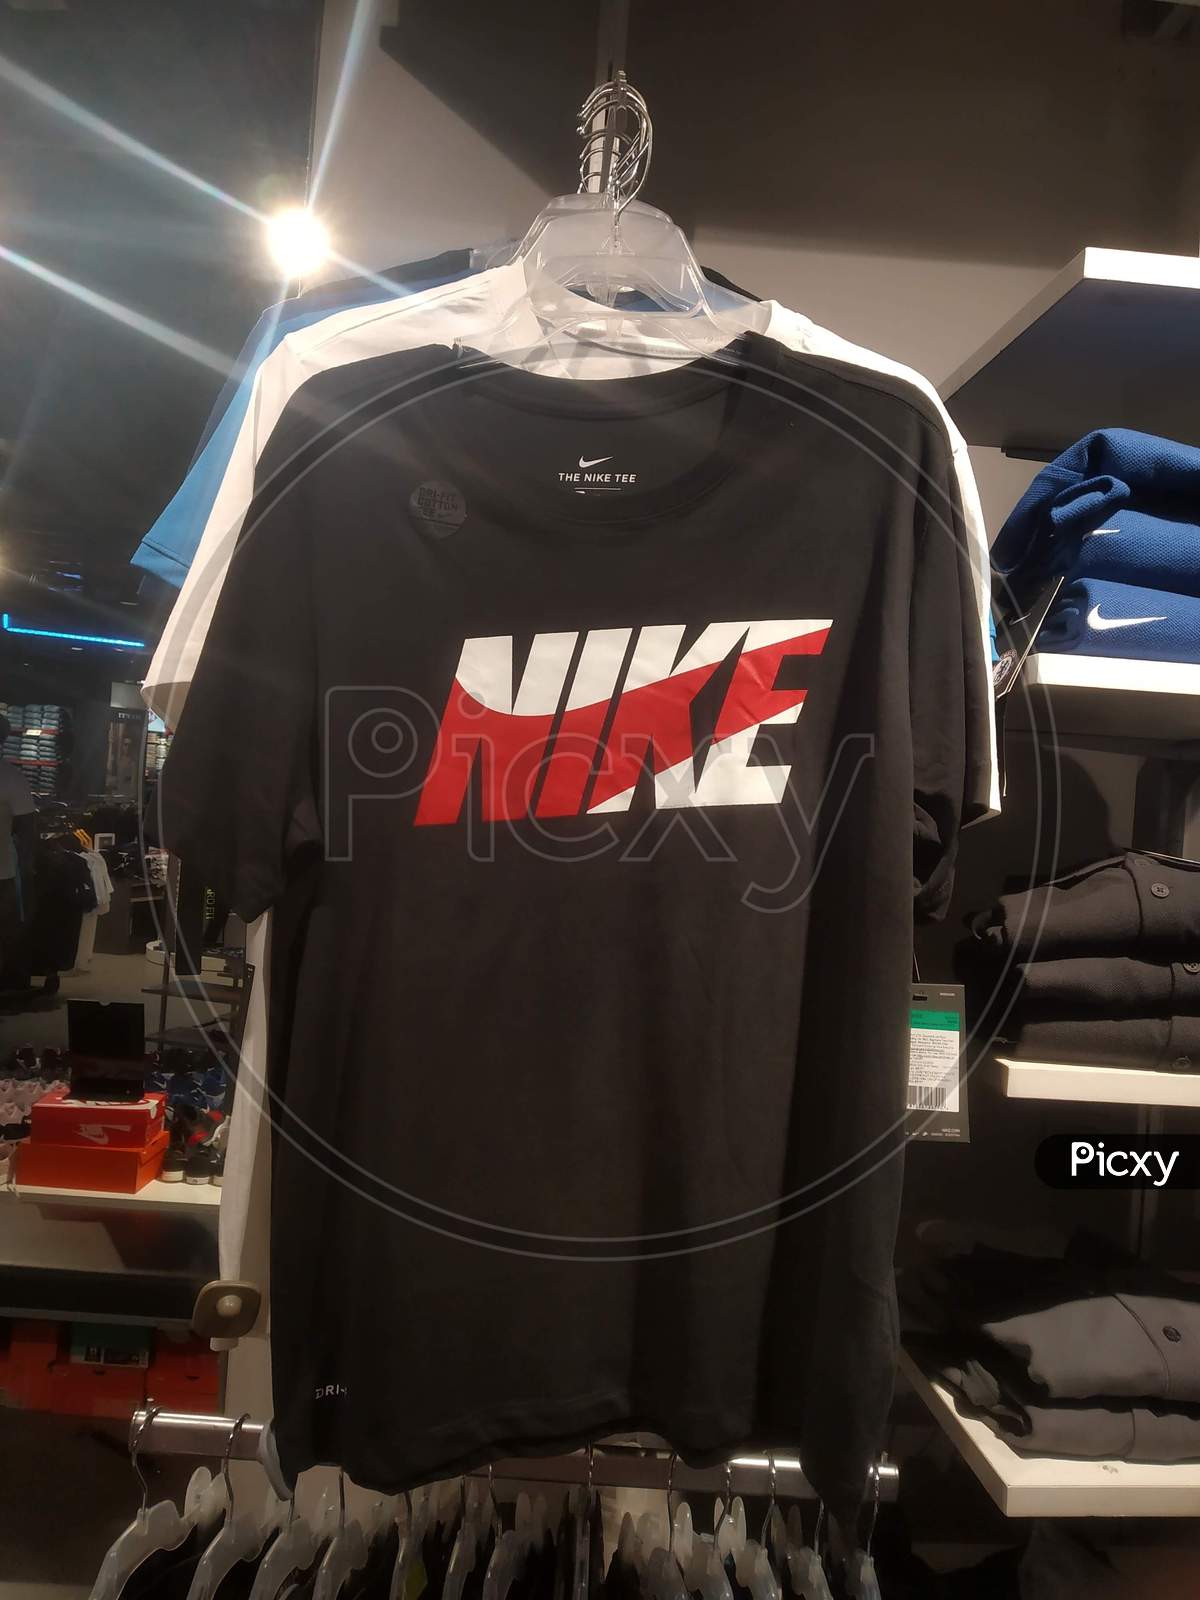 tee-shirt from shopping mall